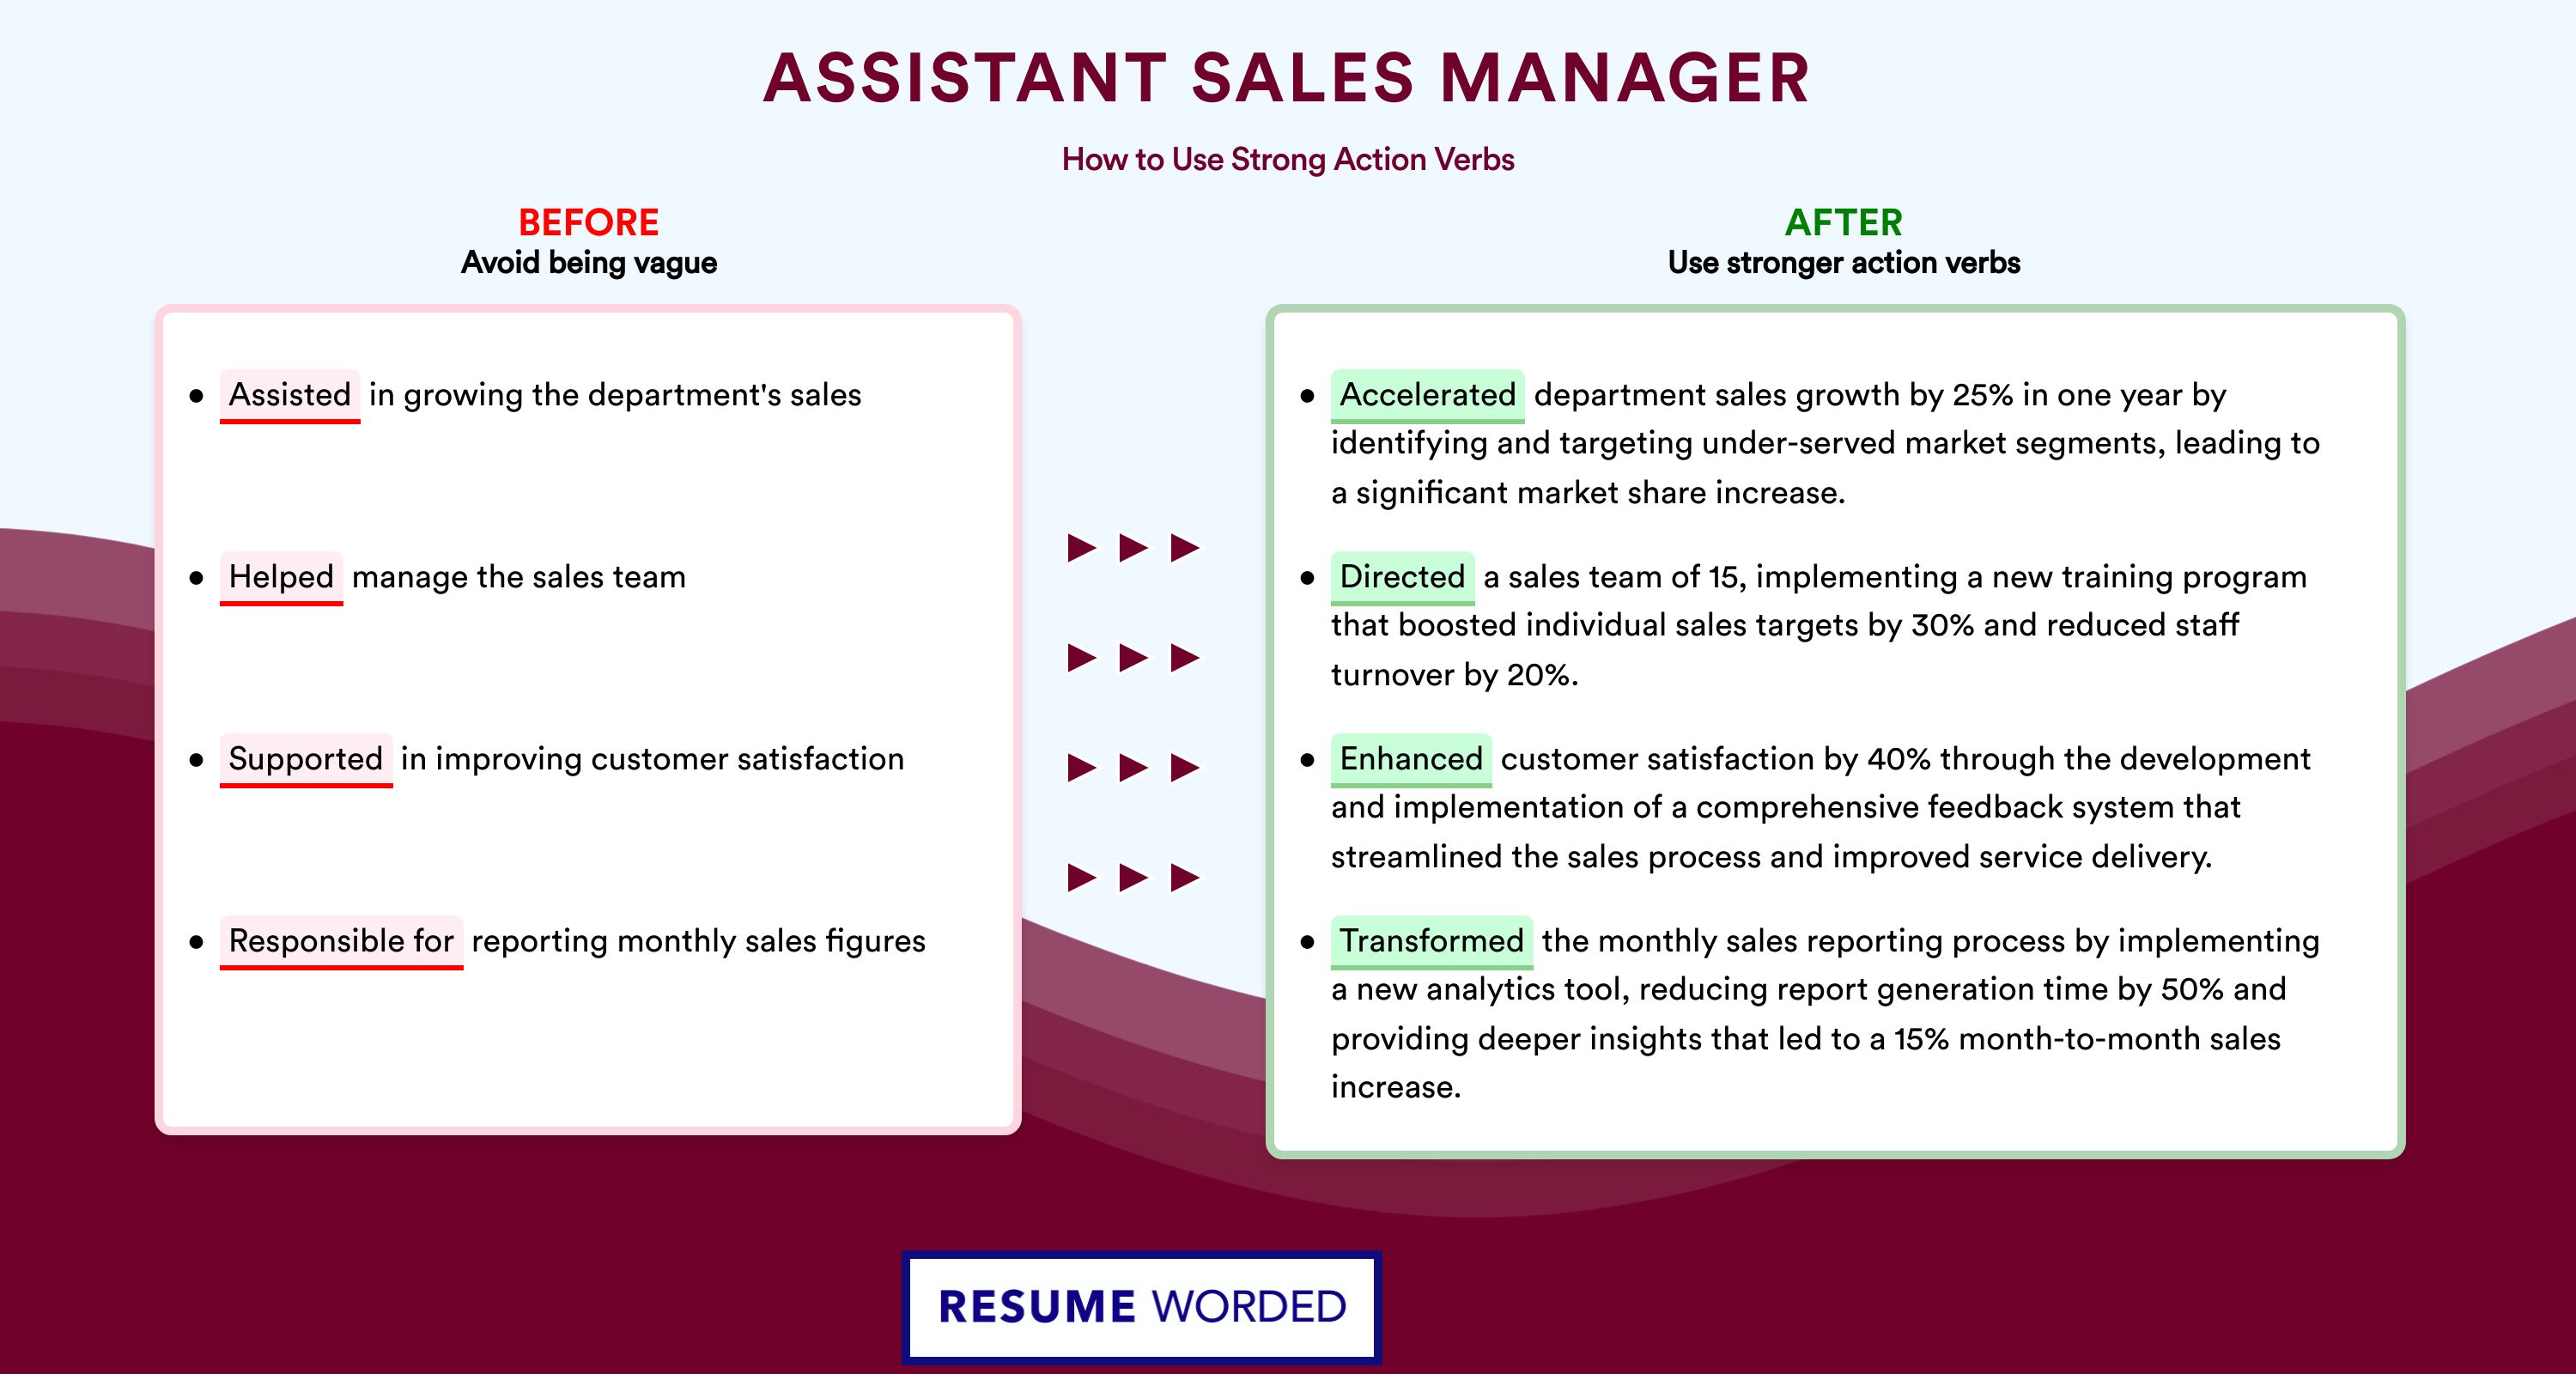 Action Verbs for Assistant Sales Manager